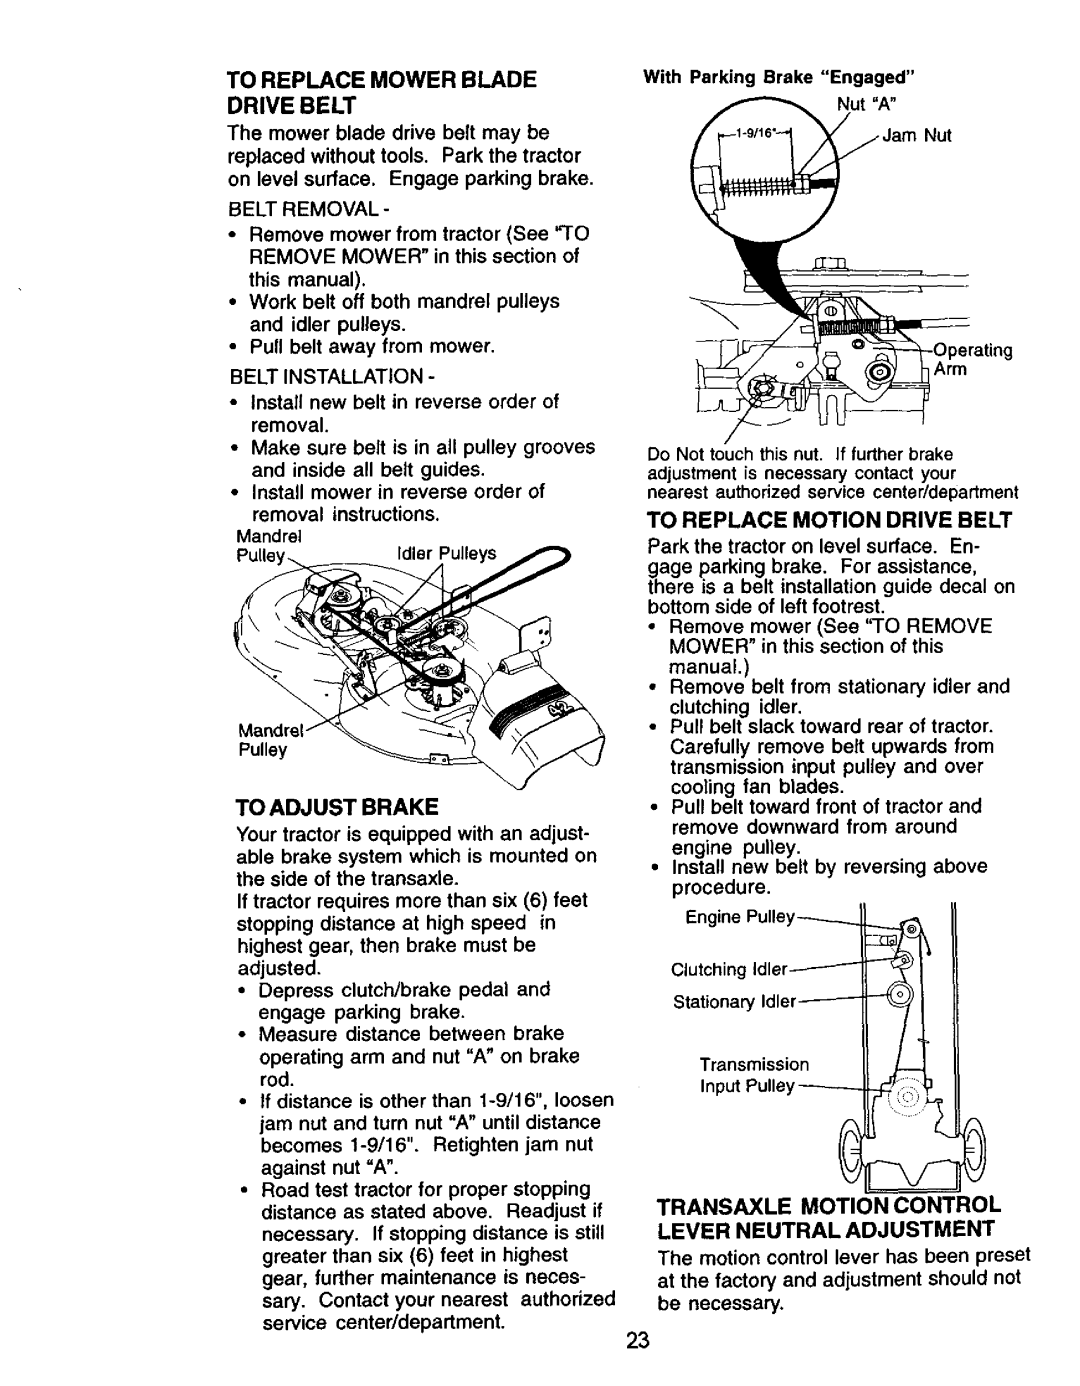 Craftsman 917.271061 owner manual To Replace Mower Blade Drive Belt, To Adjust Brake, To Replace Motion Drive Belt 